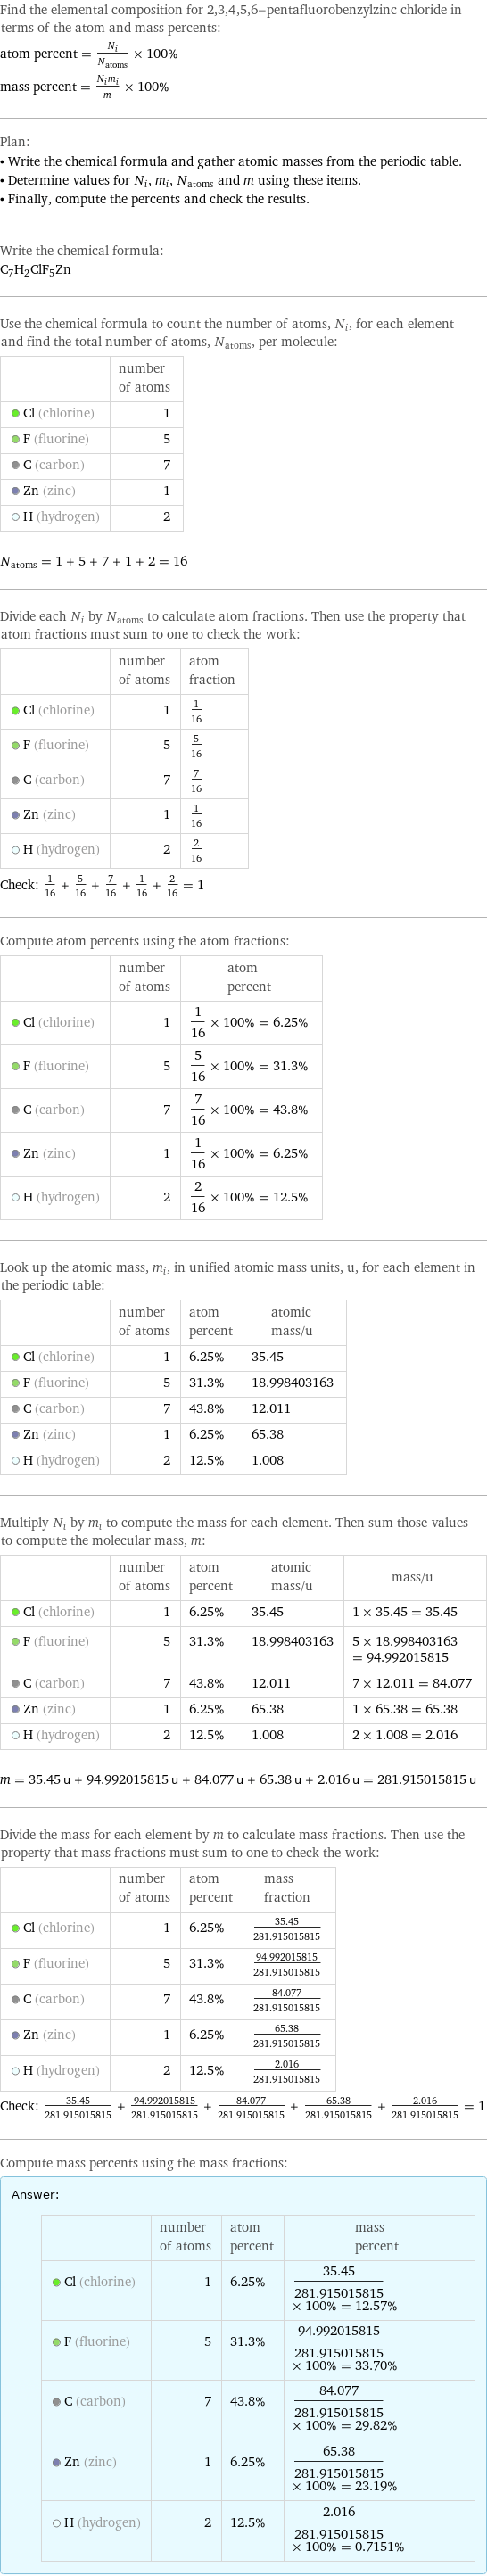 Find the elemental composition for 2, 3, 4, 5, 6-pentafluorobenzylzinc chloride in terms of the atom and mass percents: atom percent = N_i/N_atoms × 100% mass percent = (N_im_i)/m × 100% Plan: • Write the chemical formula and gather atomic masses from the periodic table. • Determine values for N_i, m_i, N_atoms and m using these items. • Finally, compute the percents and check the results. Write the chemical formula: C_7H_2ClF_5Zn Use the chemical formula to count the number of atoms, N_i, for each element and find the total number of atoms, N_atoms, per molecule:  | number of atoms  Cl (chlorine) | 1  F (fluorine) | 5  C (carbon) | 7  Zn (zinc) | 1  H (hydrogen) | 2  N_atoms = 1 + 5 + 7 + 1 + 2 = 16 Divide each N_i by N_atoms to calculate atom fractions. Then use the property that atom fractions must sum to one to check the work:  | number of atoms | atom fraction  Cl (chlorine) | 1 | 1/16  F (fluorine) | 5 | 5/16  C (carbon) | 7 | 7/16  Zn (zinc) | 1 | 1/16  H (hydrogen) | 2 | 2/16 Check: 1/16 + 5/16 + 7/16 + 1/16 + 2/16 = 1 Compute atom percents using the atom fractions:  | number of atoms | atom percent  Cl (chlorine) | 1 | 1/16 × 100% = 6.25%  F (fluorine) | 5 | 5/16 × 100% = 31.3%  C (carbon) | 7 | 7/16 × 100% = 43.8%  Zn (zinc) | 1 | 1/16 × 100% = 6.25%  H (hydrogen) | 2 | 2/16 × 100% = 12.5% Look up the atomic mass, m_i, in unified atomic mass units, u, for each element in the periodic table:  | number of atoms | atom percent | atomic mass/u  Cl (chlorine) | 1 | 6.25% | 35.45  F (fluorine) | 5 | 31.3% | 18.998403163  C (carbon) | 7 | 43.8% | 12.011  Zn (zinc) | 1 | 6.25% | 65.38  H (hydrogen) | 2 | 12.5% | 1.008 Multiply N_i by m_i to compute the mass for each element. Then sum those values to compute the molecular mass, m:  | number of atoms | atom percent | atomic mass/u | mass/u  Cl (chlorine) | 1 | 6.25% | 35.45 | 1 × 35.45 = 35.45  F (fluorine) | 5 | 31.3% | 18.998403163 | 5 × 18.998403163 = 94.992015815  C (carbon) | 7 | 43.8% | 12.011 | 7 × 12.011 = 84.077  Zn (zinc) | 1 | 6.25% | 65.38 | 1 × 65.38 = 65.38  H (hydrogen) | 2 | 12.5% | 1.008 | 2 × 1.008 = 2.016  m = 35.45 u + 94.992015815 u + 84.077 u + 65.38 u + 2.016 u = 281.915015815 u Divide the mass for each element by m to calculate mass fractions. Then use the property that mass fractions must sum to one to check the work:  | number of atoms | atom percent | mass fraction  Cl (chlorine) | 1 | 6.25% | 35.45/281.915015815  F (fluorine) | 5 | 31.3% | 94.992015815/281.915015815  C (carbon) | 7 | 43.8% | 84.077/281.915015815  Zn (zinc) | 1 | 6.25% | 65.38/281.915015815  H (hydrogen) | 2 | 12.5% | 2.016/281.915015815 Check: 35.45/281.915015815 + 94.992015815/281.915015815 + 84.077/281.915015815 + 65.38/281.915015815 + 2.016/281.915015815 = 1 Compute mass percents using the mass fractions: Answer: |   | | number of atoms | atom percent | mass percent  Cl (chlorine) | 1 | 6.25% | 35.45/281.915015815 × 100% = 12.57%  F (fluorine) | 5 | 31.3% | 94.992015815/281.915015815 × 100% = 33.70%  C (carbon) | 7 | 43.8% | 84.077/281.915015815 × 100% = 29.82%  Zn (zinc) | 1 | 6.25% | 65.38/281.915015815 × 100% = 23.19%  H (hydrogen) | 2 | 12.5% | 2.016/281.915015815 × 100% = 0.7151%